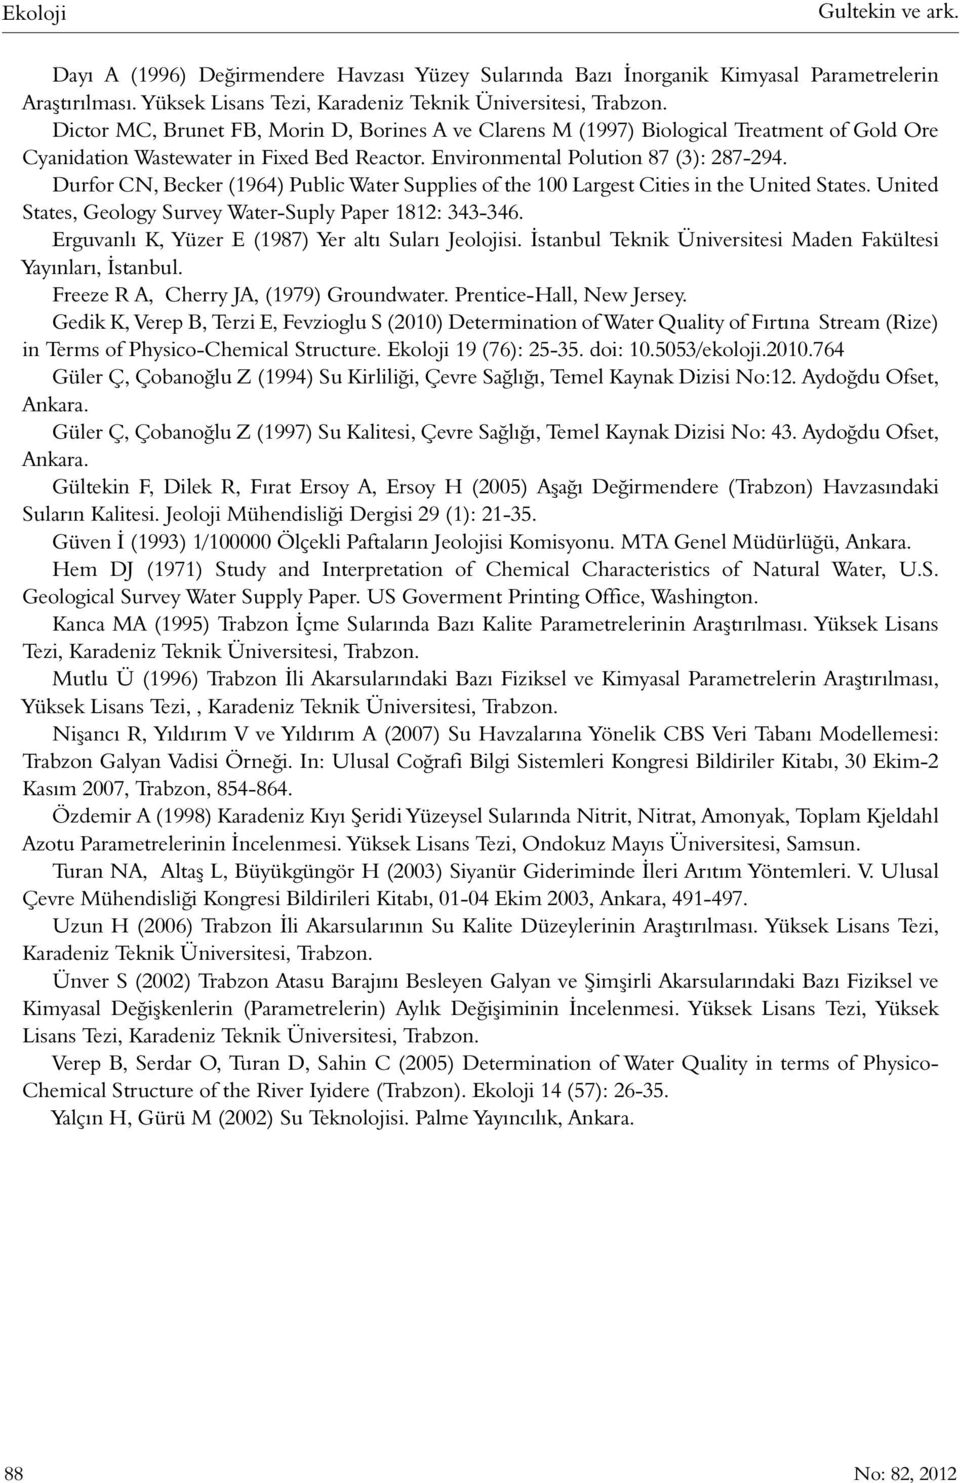 Durfor CN, Becker (1964) Public Water Supplies of the 100 Largest Cities in the United States. United States, Geology Survey Water-Suply Paper 1812: 343-346.